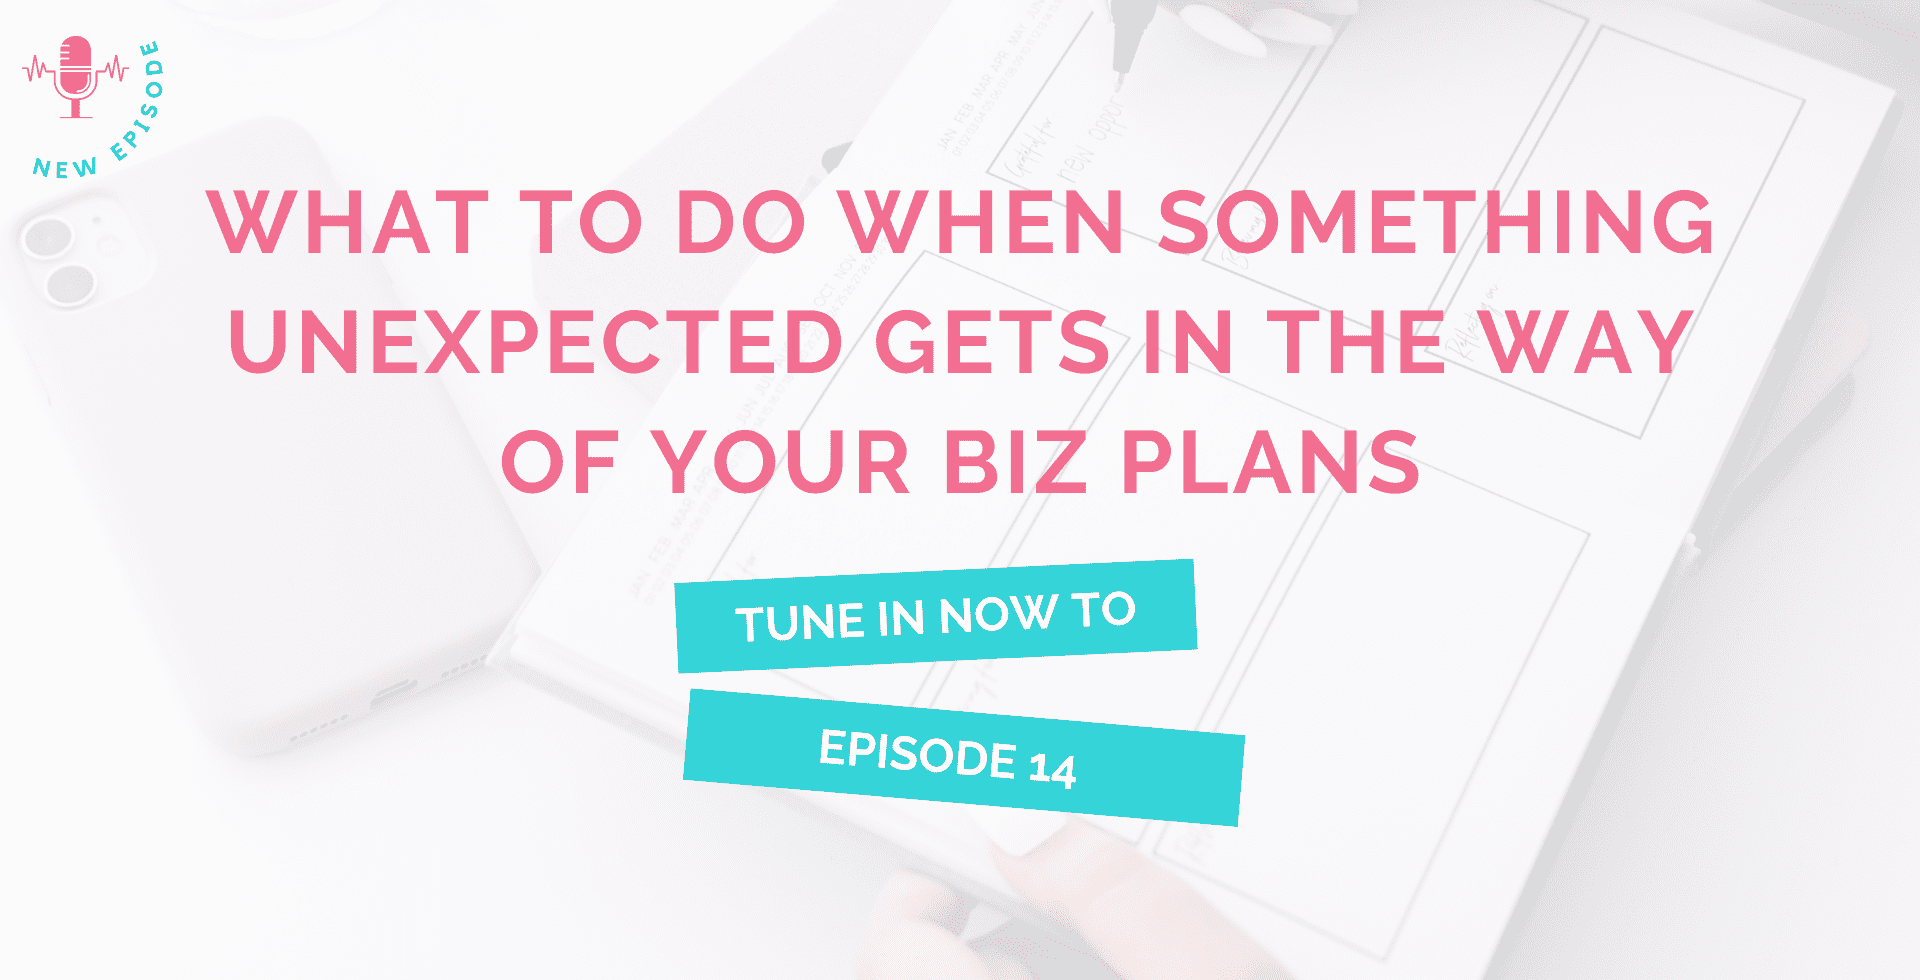 episode 14 - What To Do When Something Unexpected Gets in the Way of Your Biz Plans